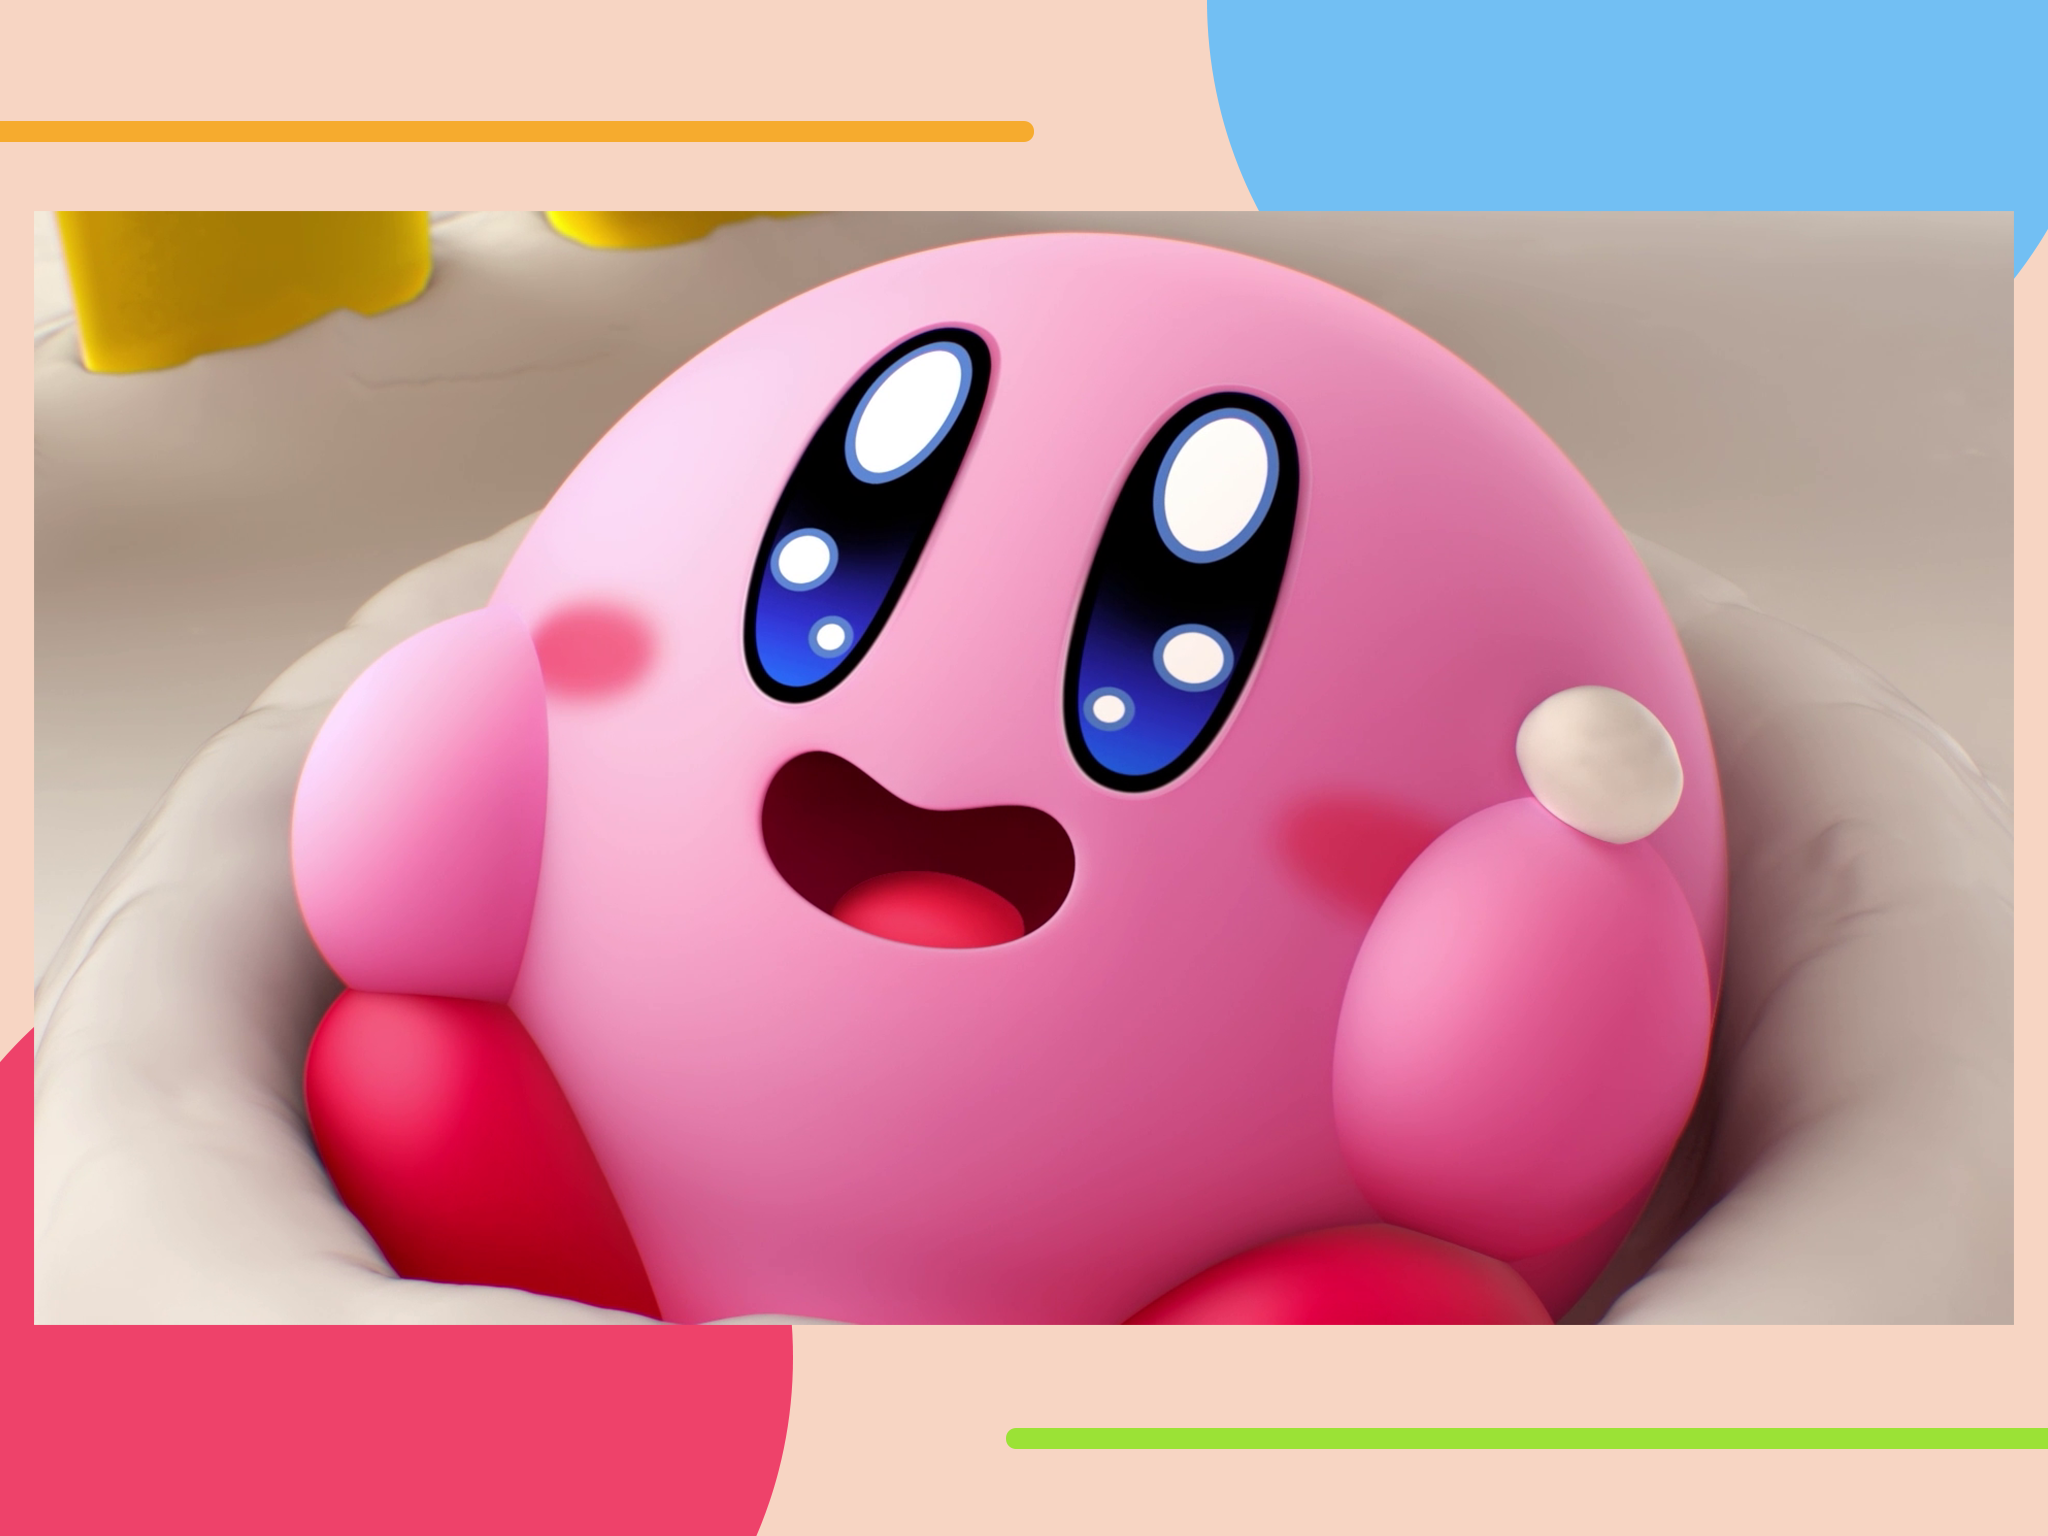 Request: Kirby and the Forgotten Land - Disable Depth of Field Blur